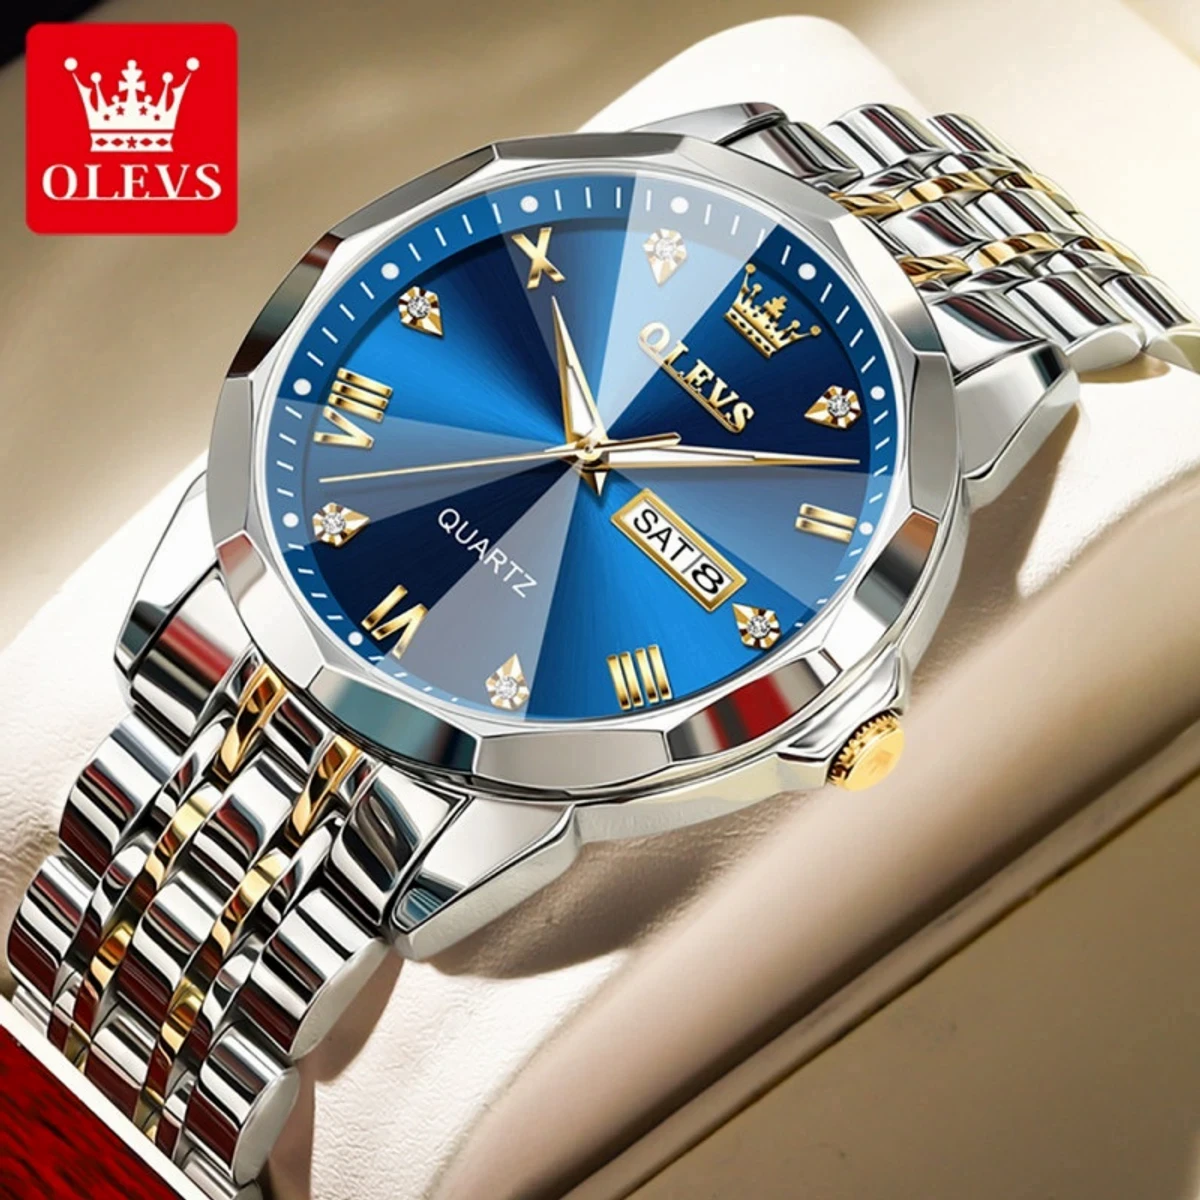 OLEVS MODEL 9931 Watch for Men Stainless Steel Watches - 9941 TOTON AR DIAL BLUE- MAN WATCH